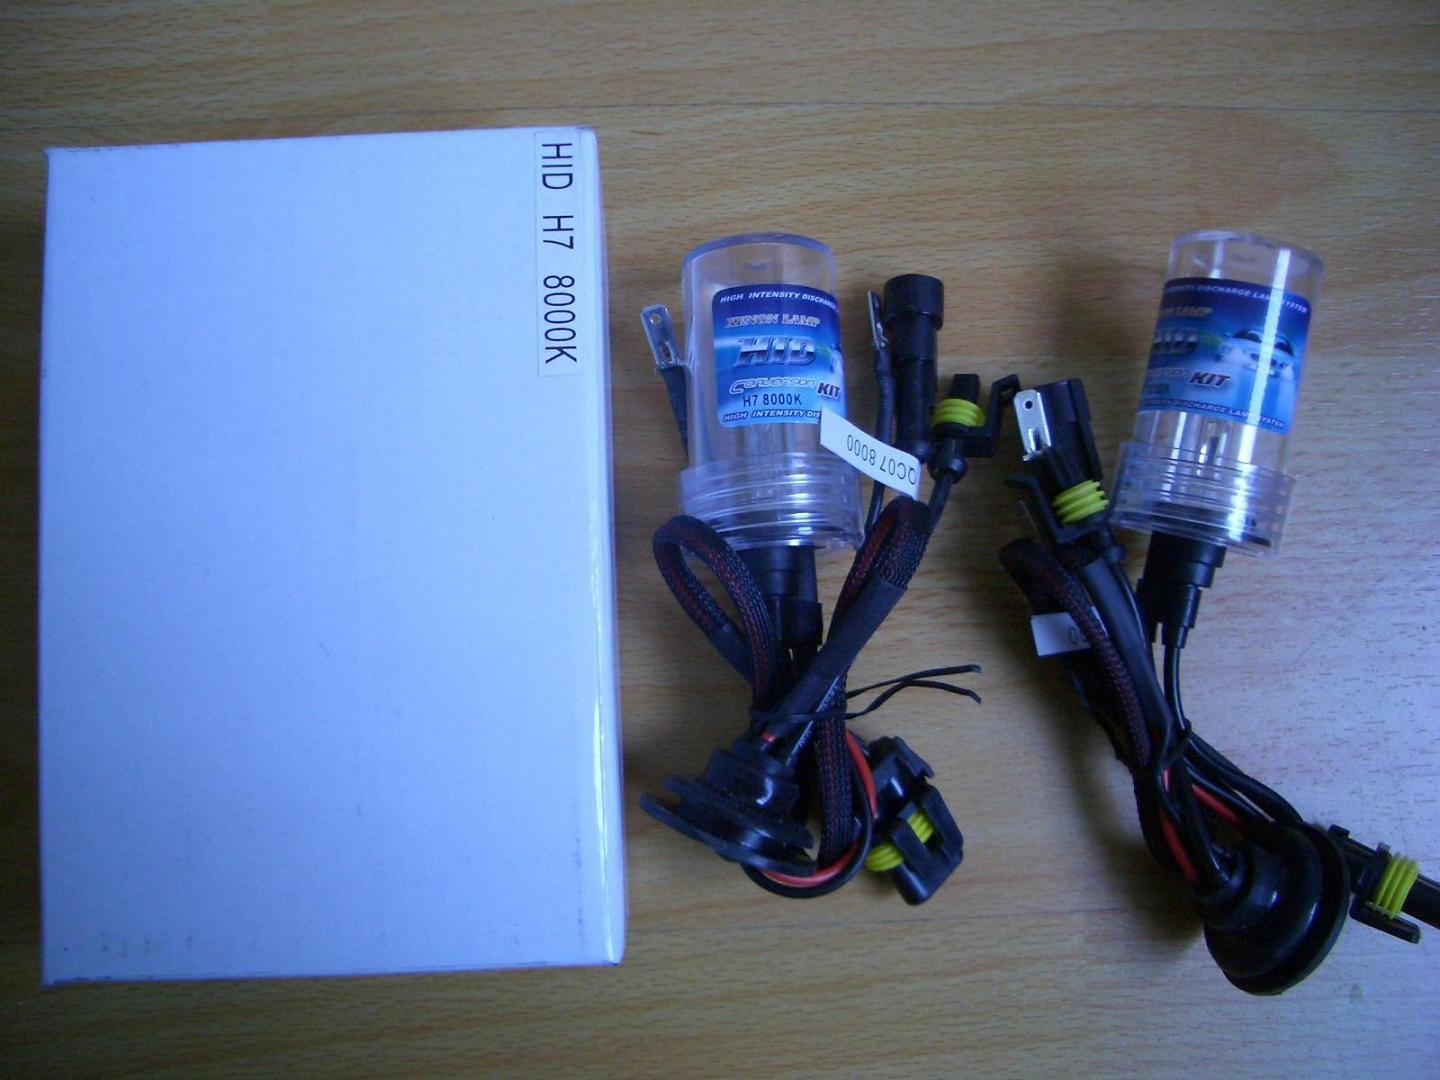 HID LAMP packing